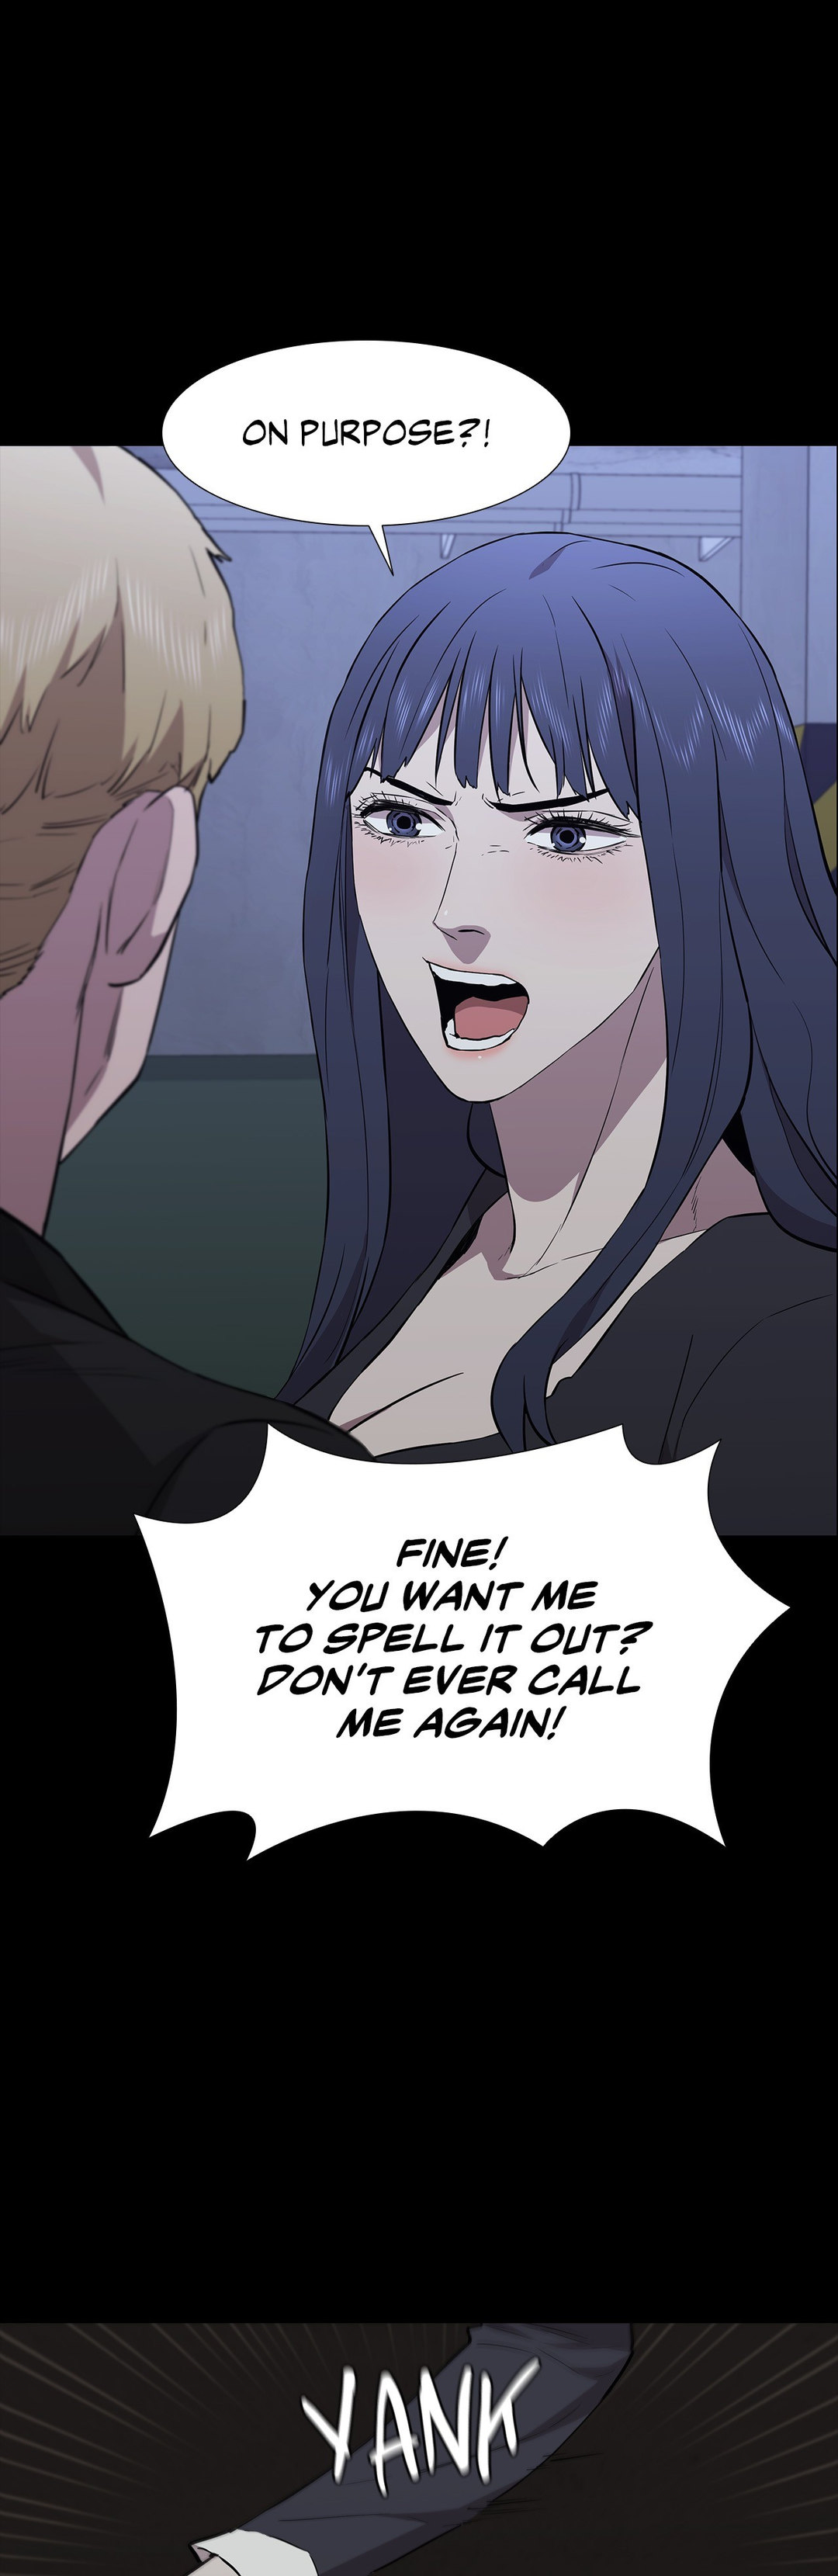 Thorns on Innocence - Chapter 88 Page 7